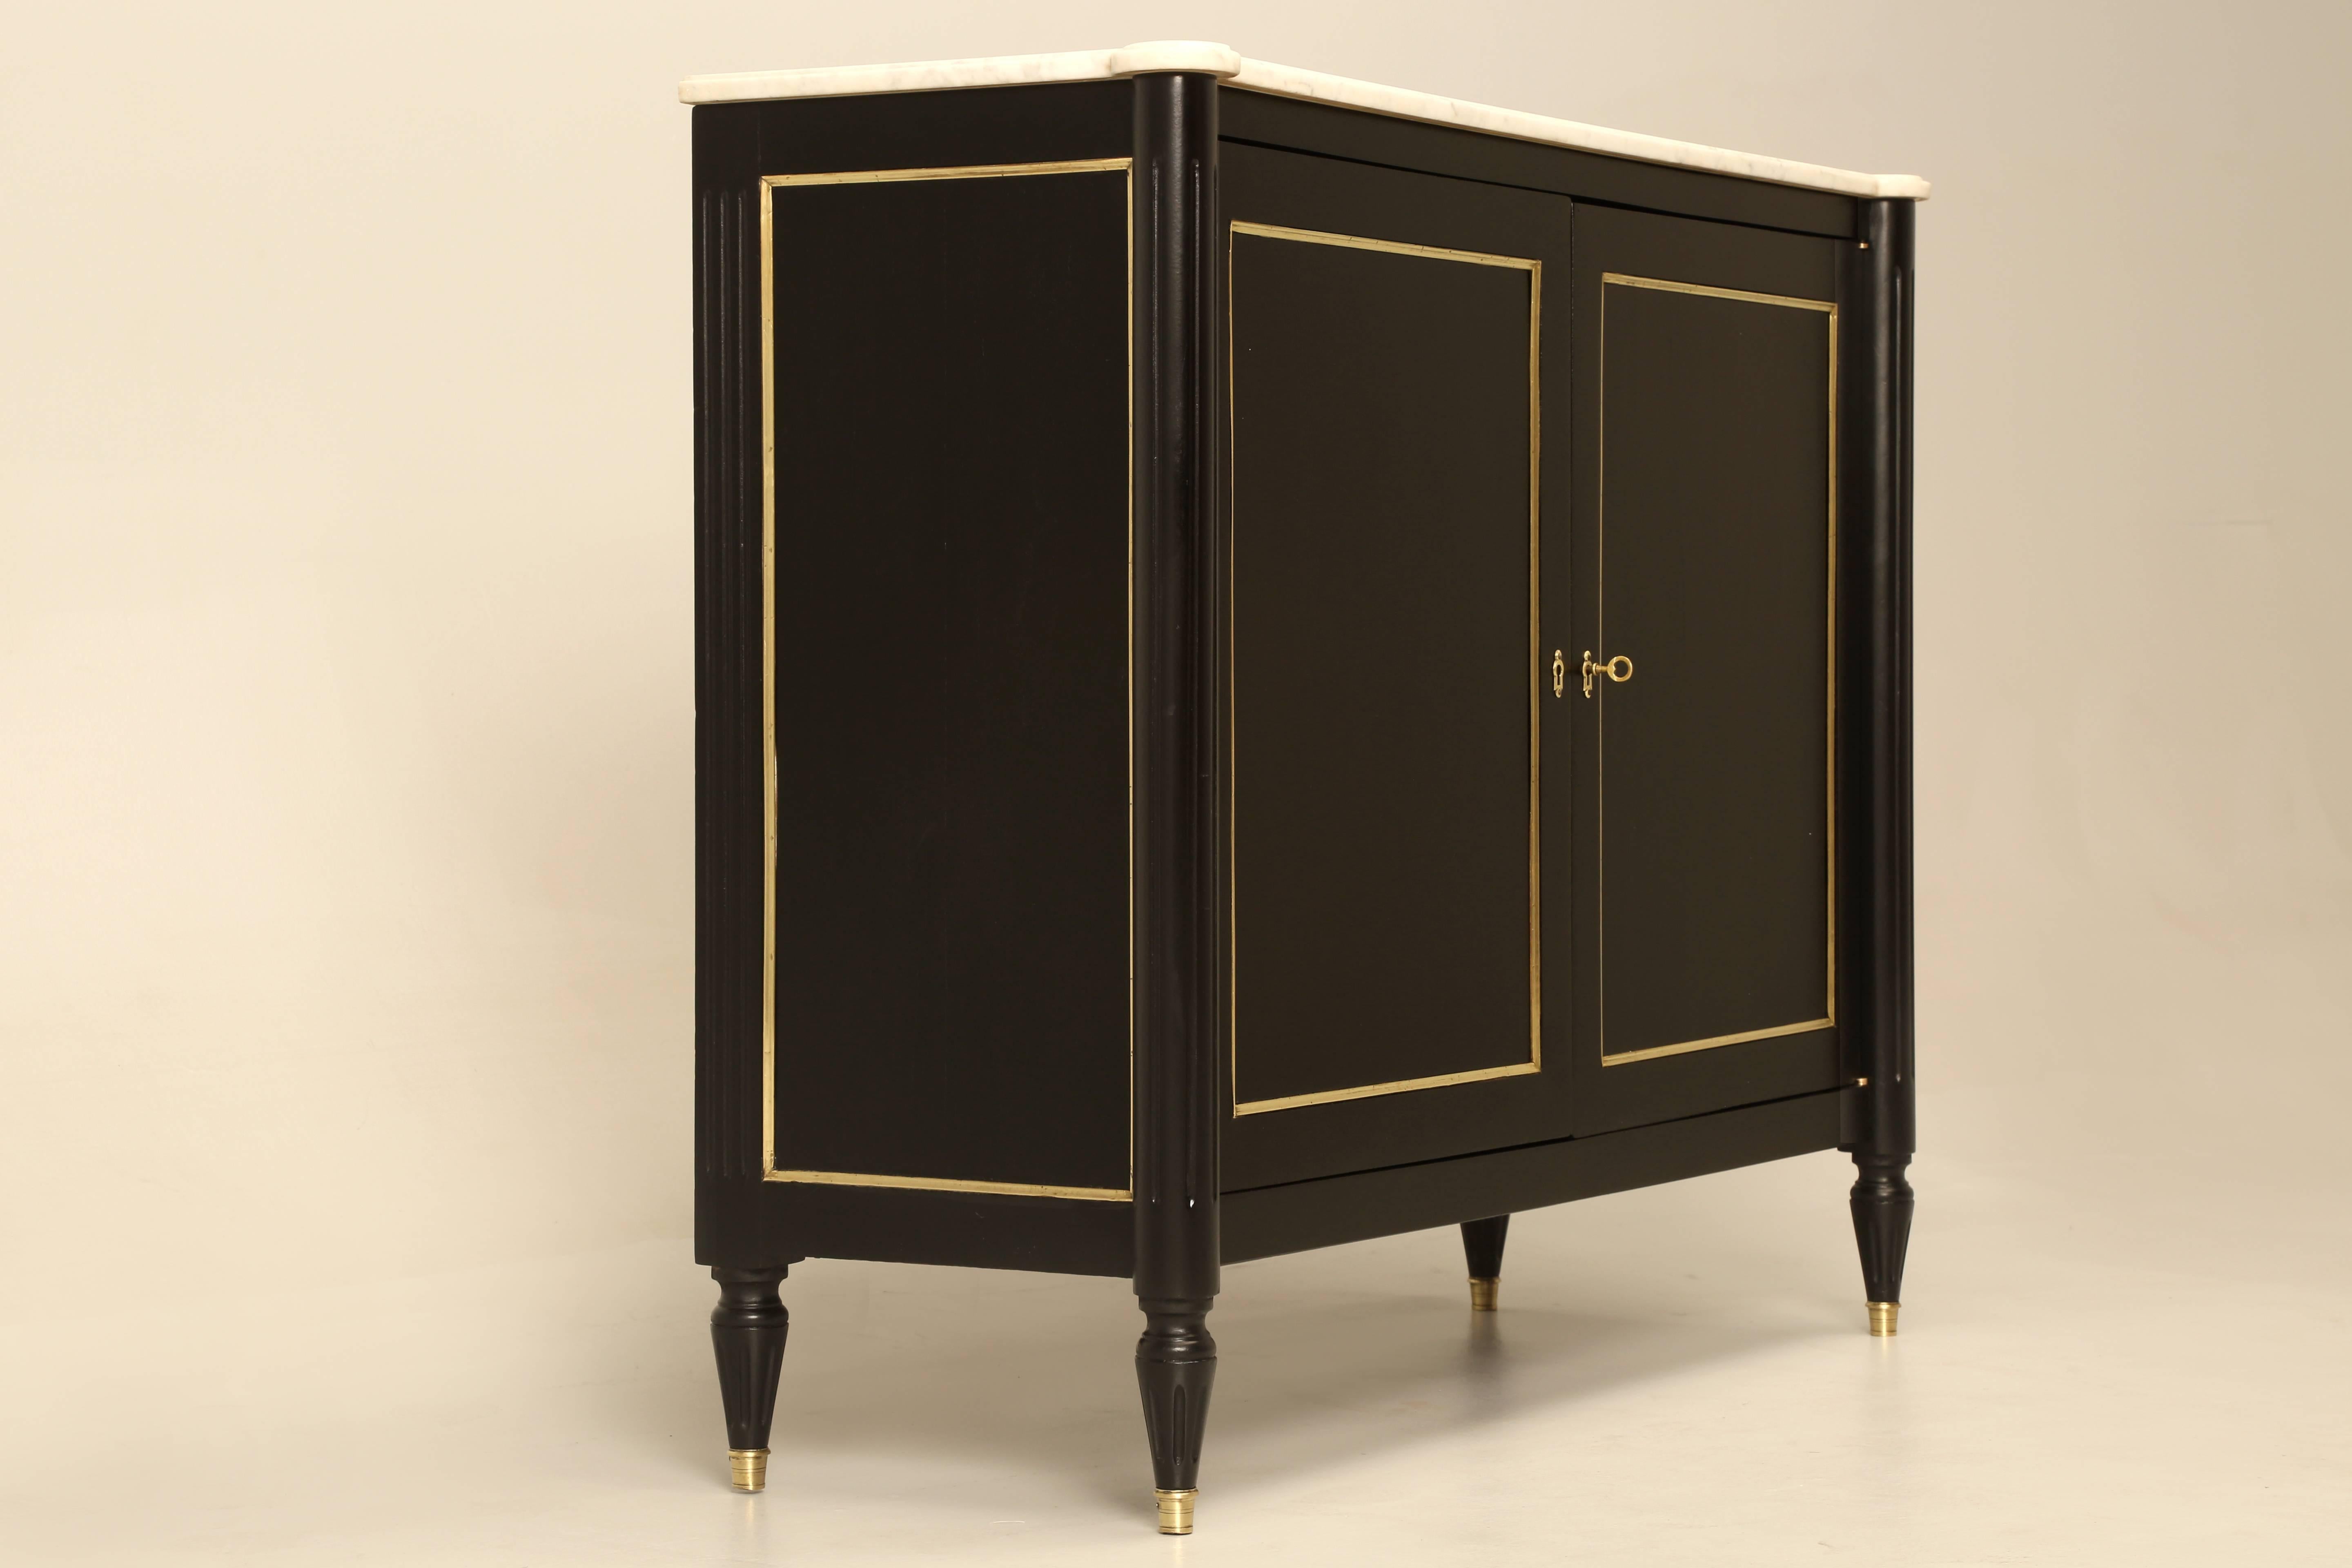 Very unusual two-door Louis XVI style buffet, with a fitted interior. Beautiful solid mahogany cabinet that was hand scrapped and sanded (no chemicals used) before we applied an old fashion ebonized finish, that still allows for the graining of the